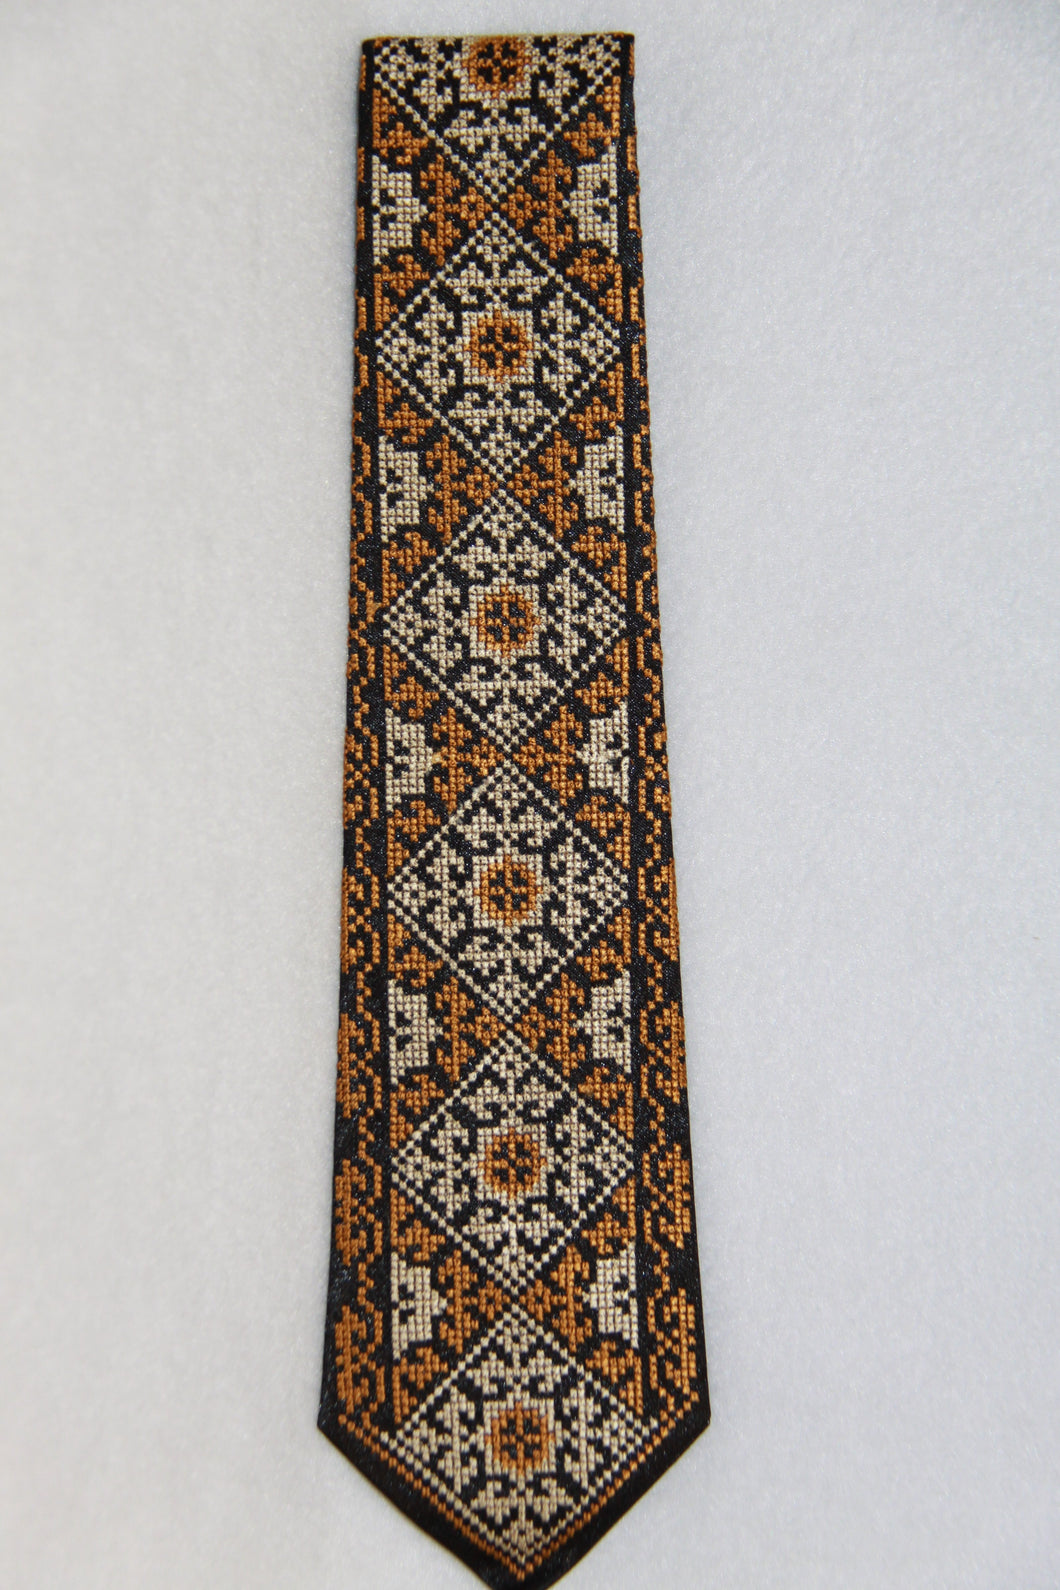 Brown Embroidered Neck Tie